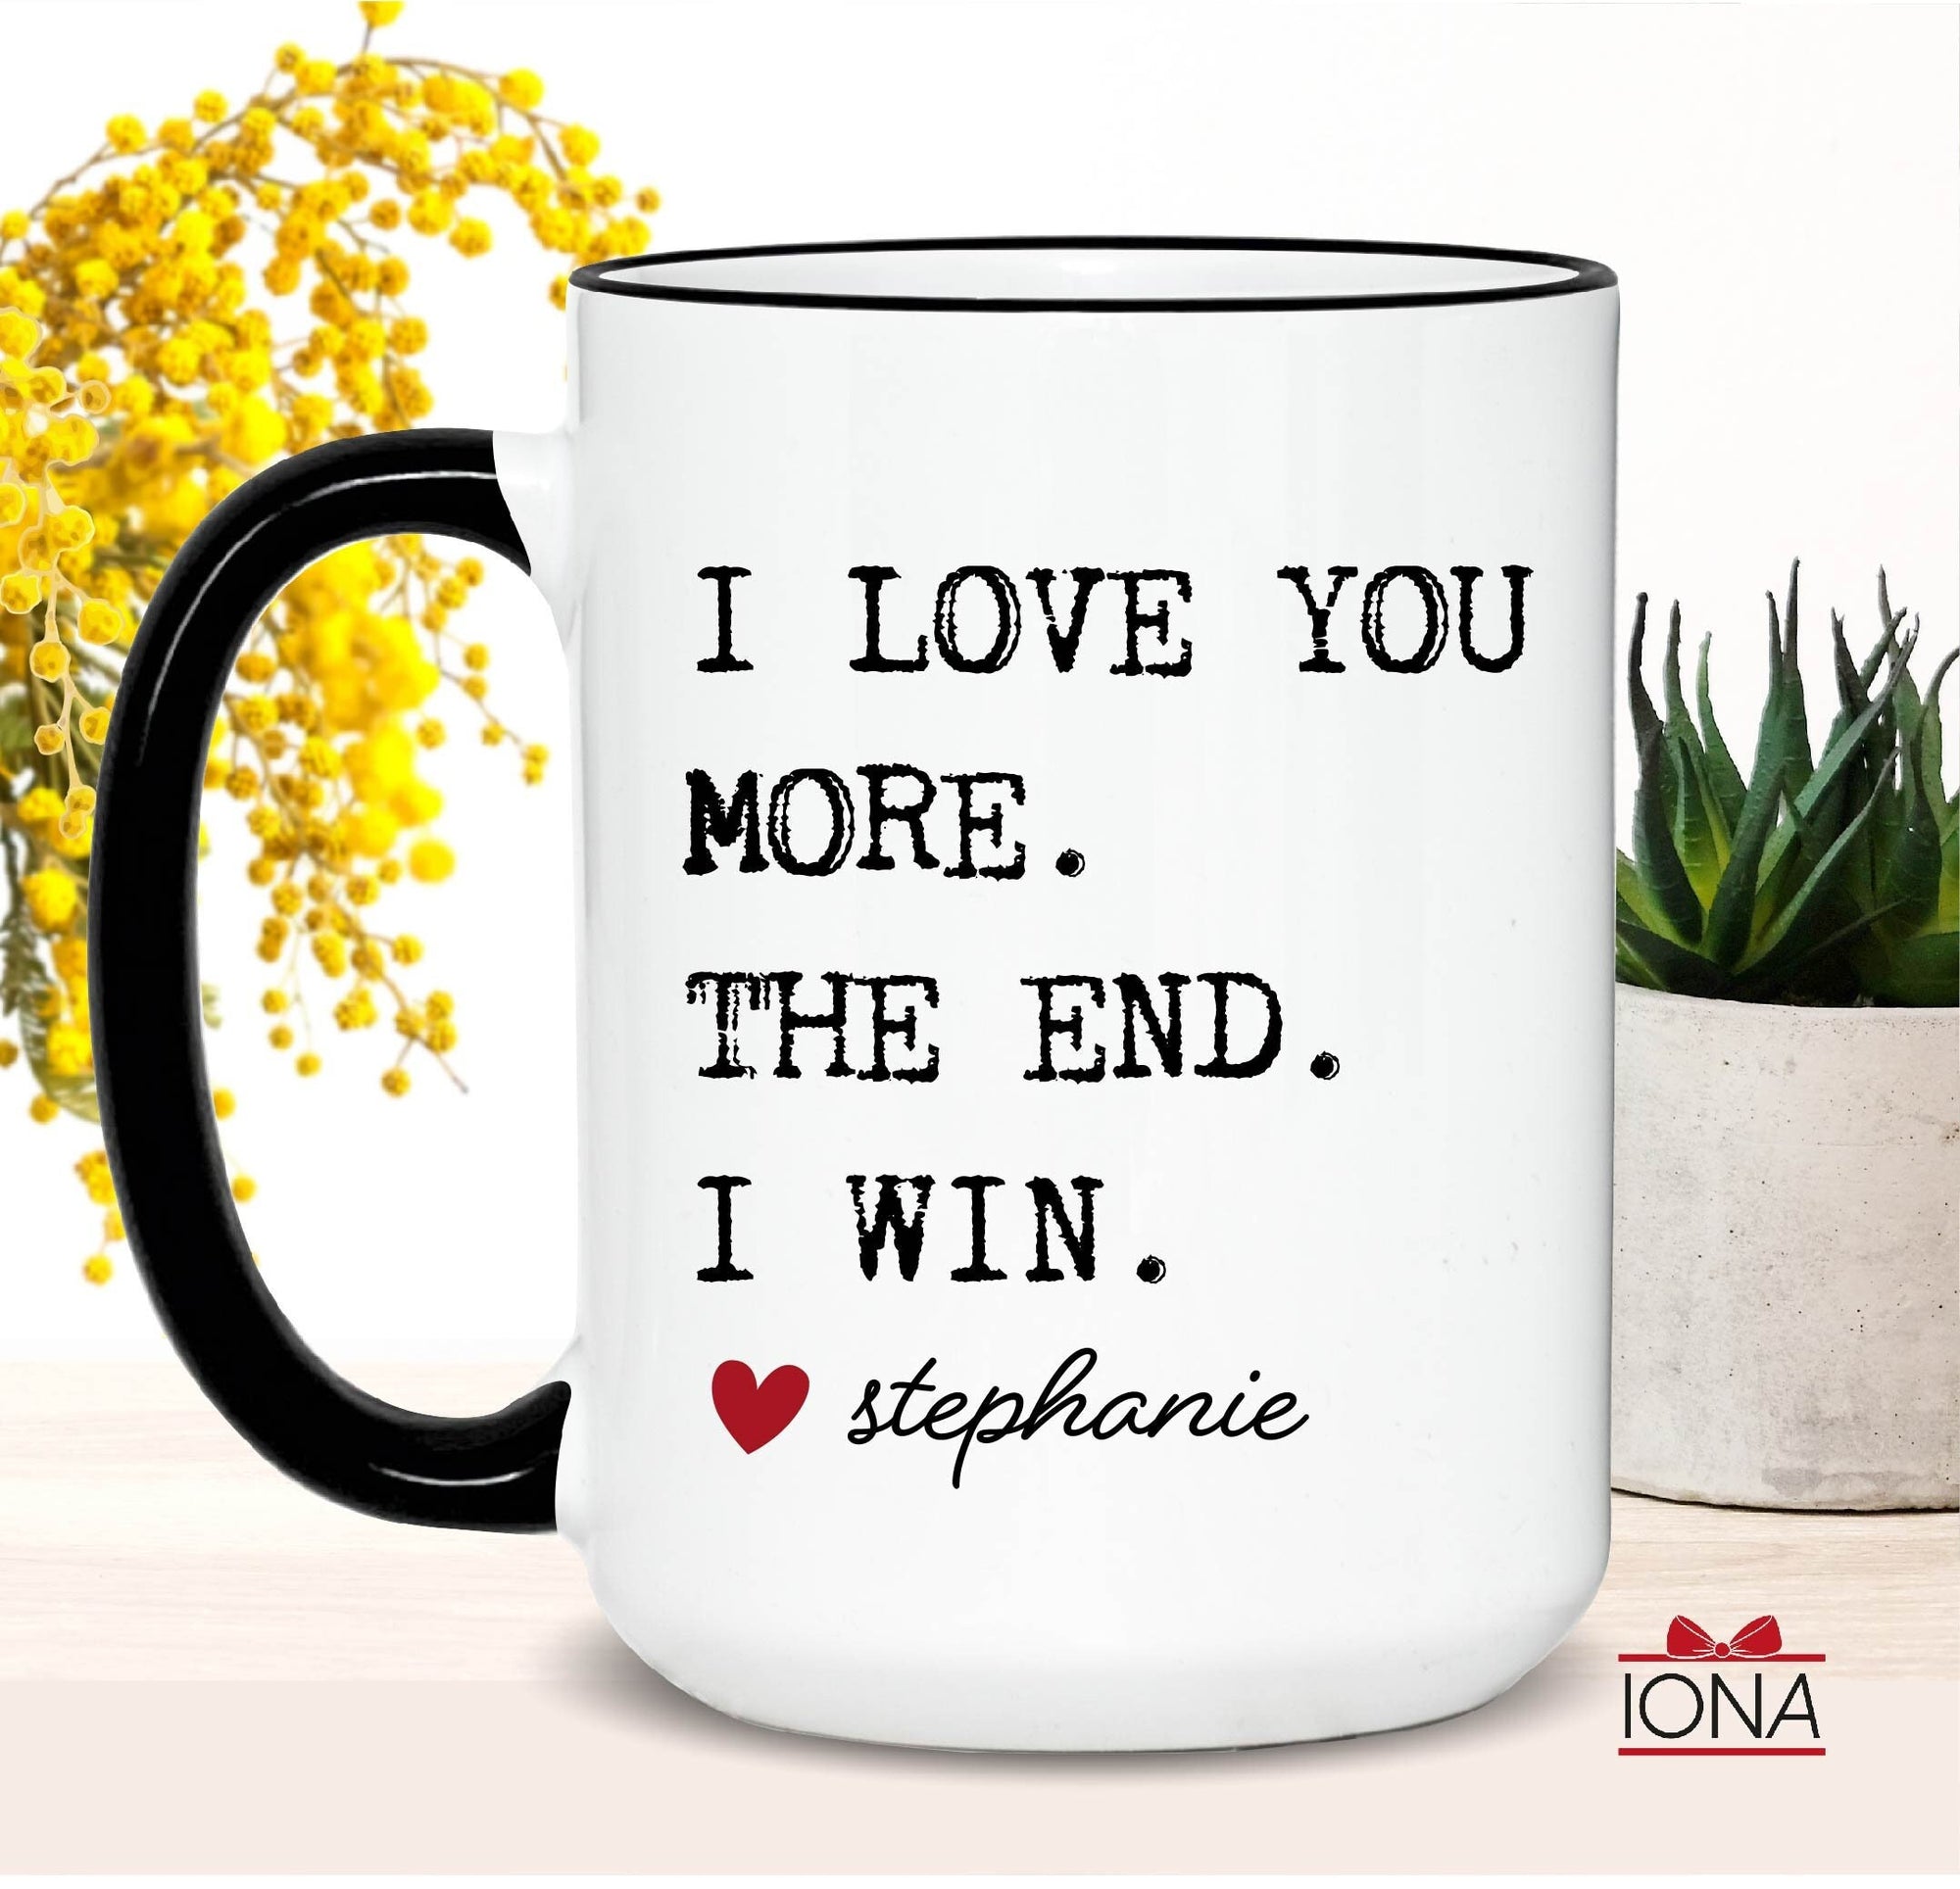 Personalized Mom gifts from daughter Coffee Mug, mothers day gift idea mom coffee mug mom tea cup gift for mom customized mother gifts funny